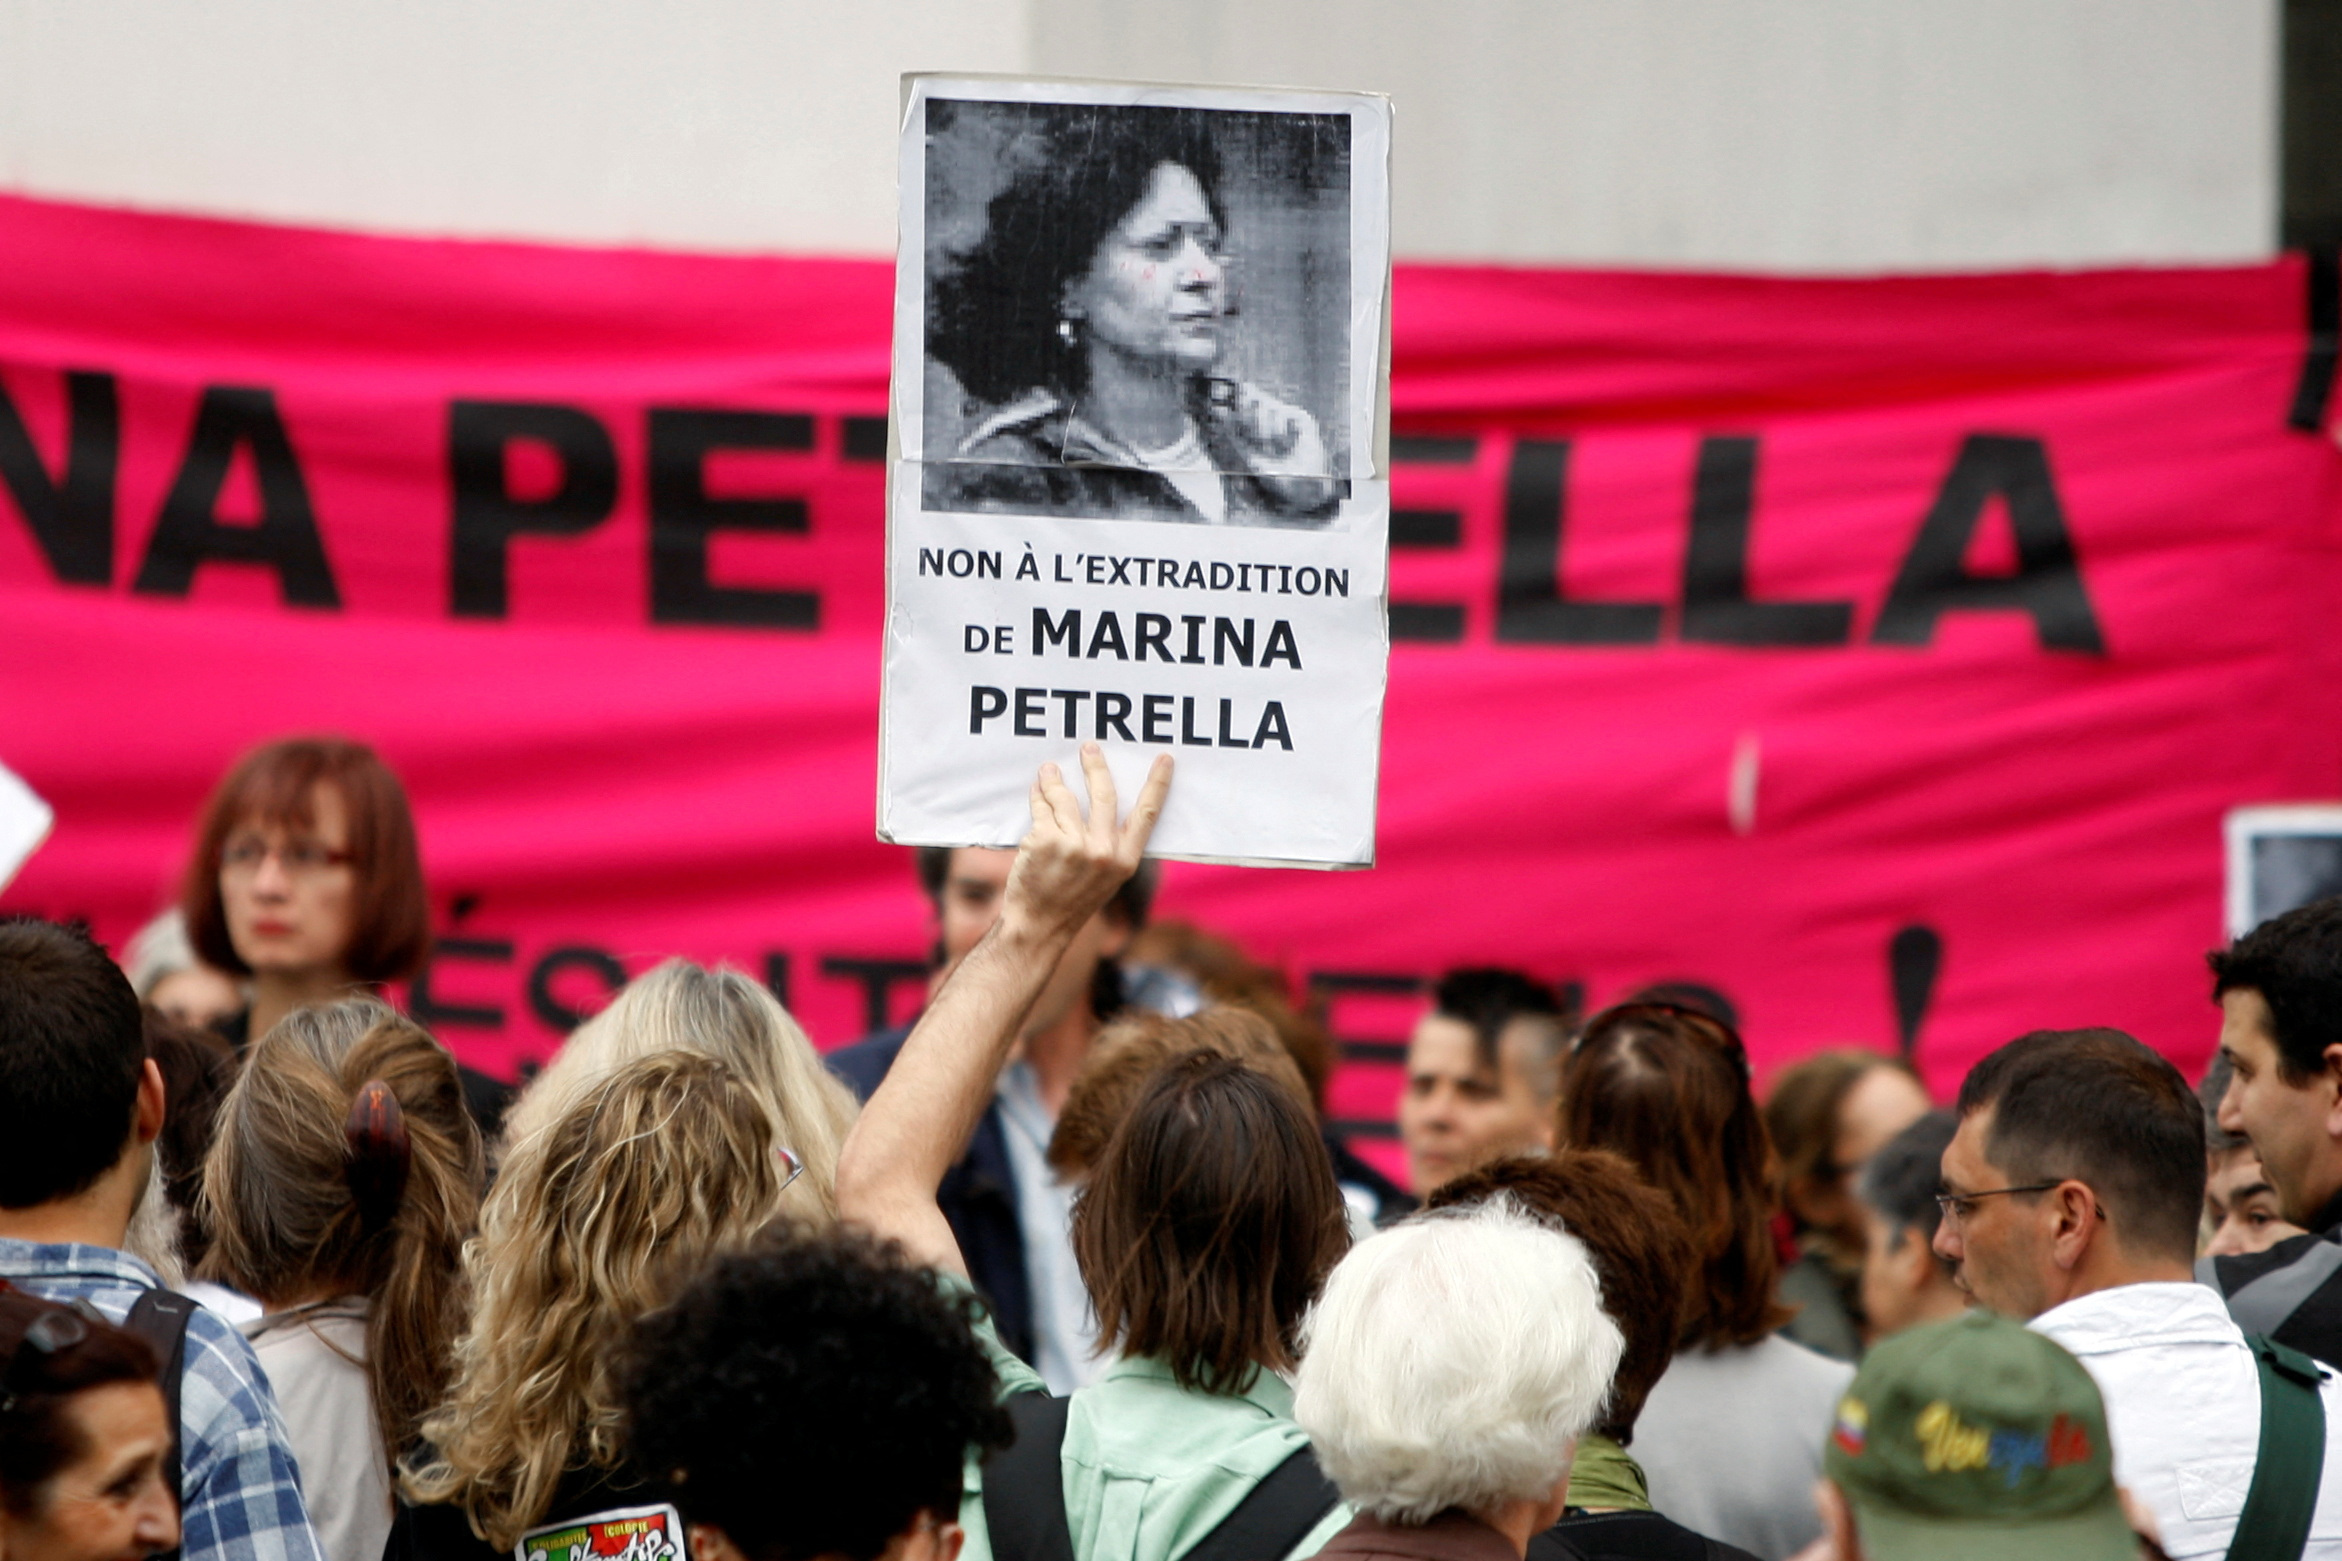 A demonstrator holds up a portrait of former member of the Red Brigades Marina Petrella during a protest in Paris